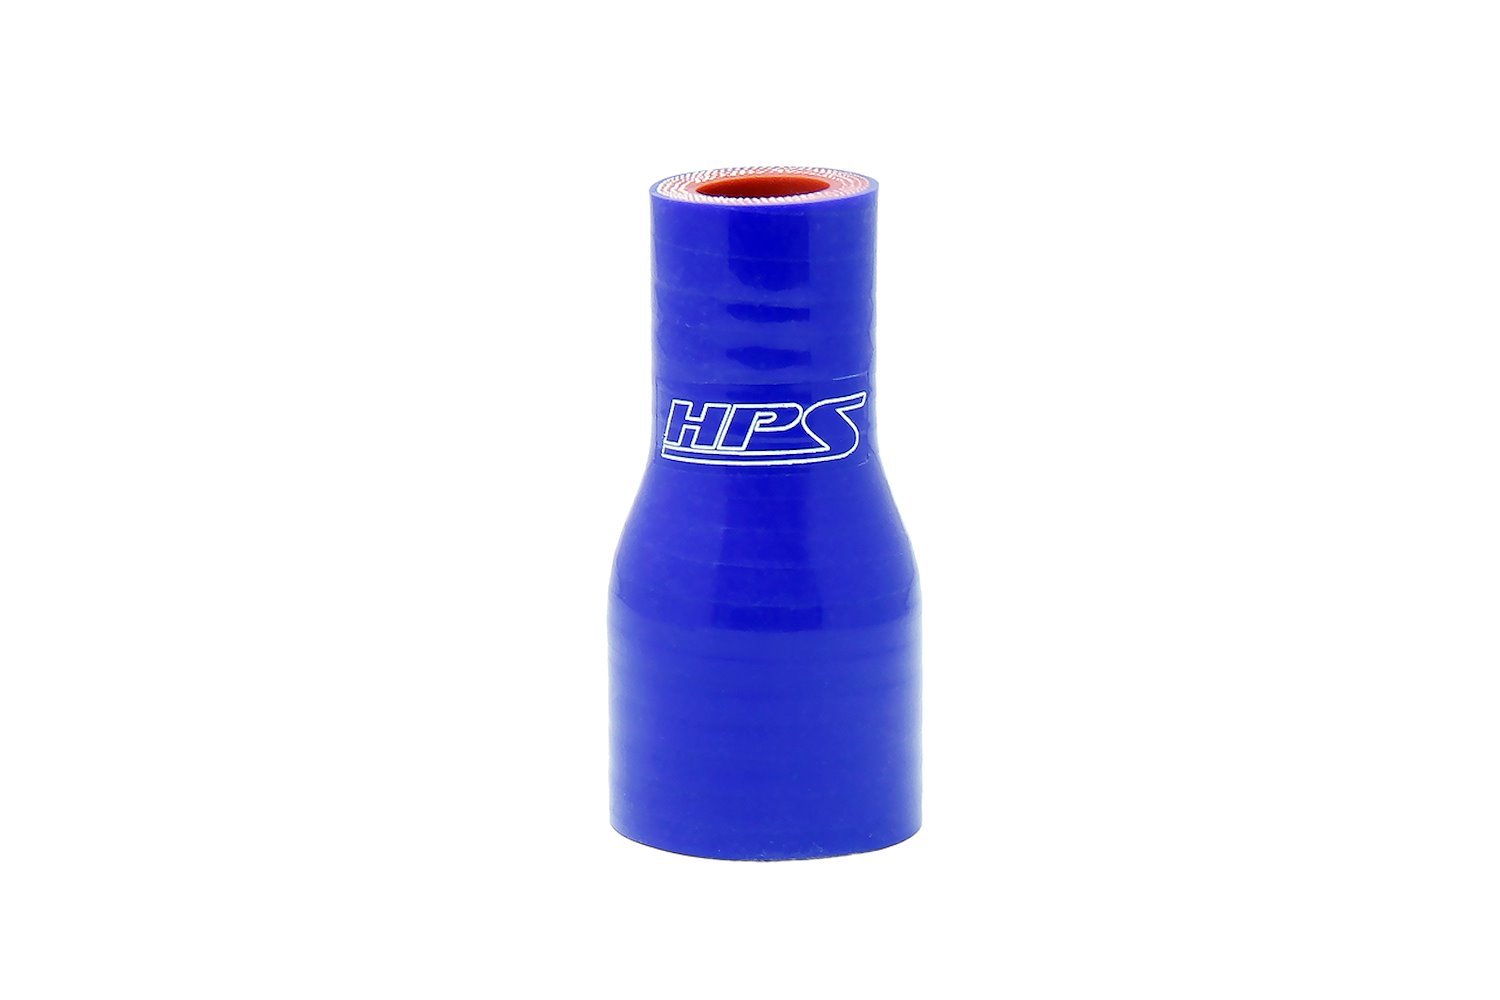 HTSR-112-150-BLUE Silicone Reducer Hose, High-Temp 4-Ply Reinforced, 1-1/8 in. - 1-1/2 in. ID, 3 in. Long, Blue